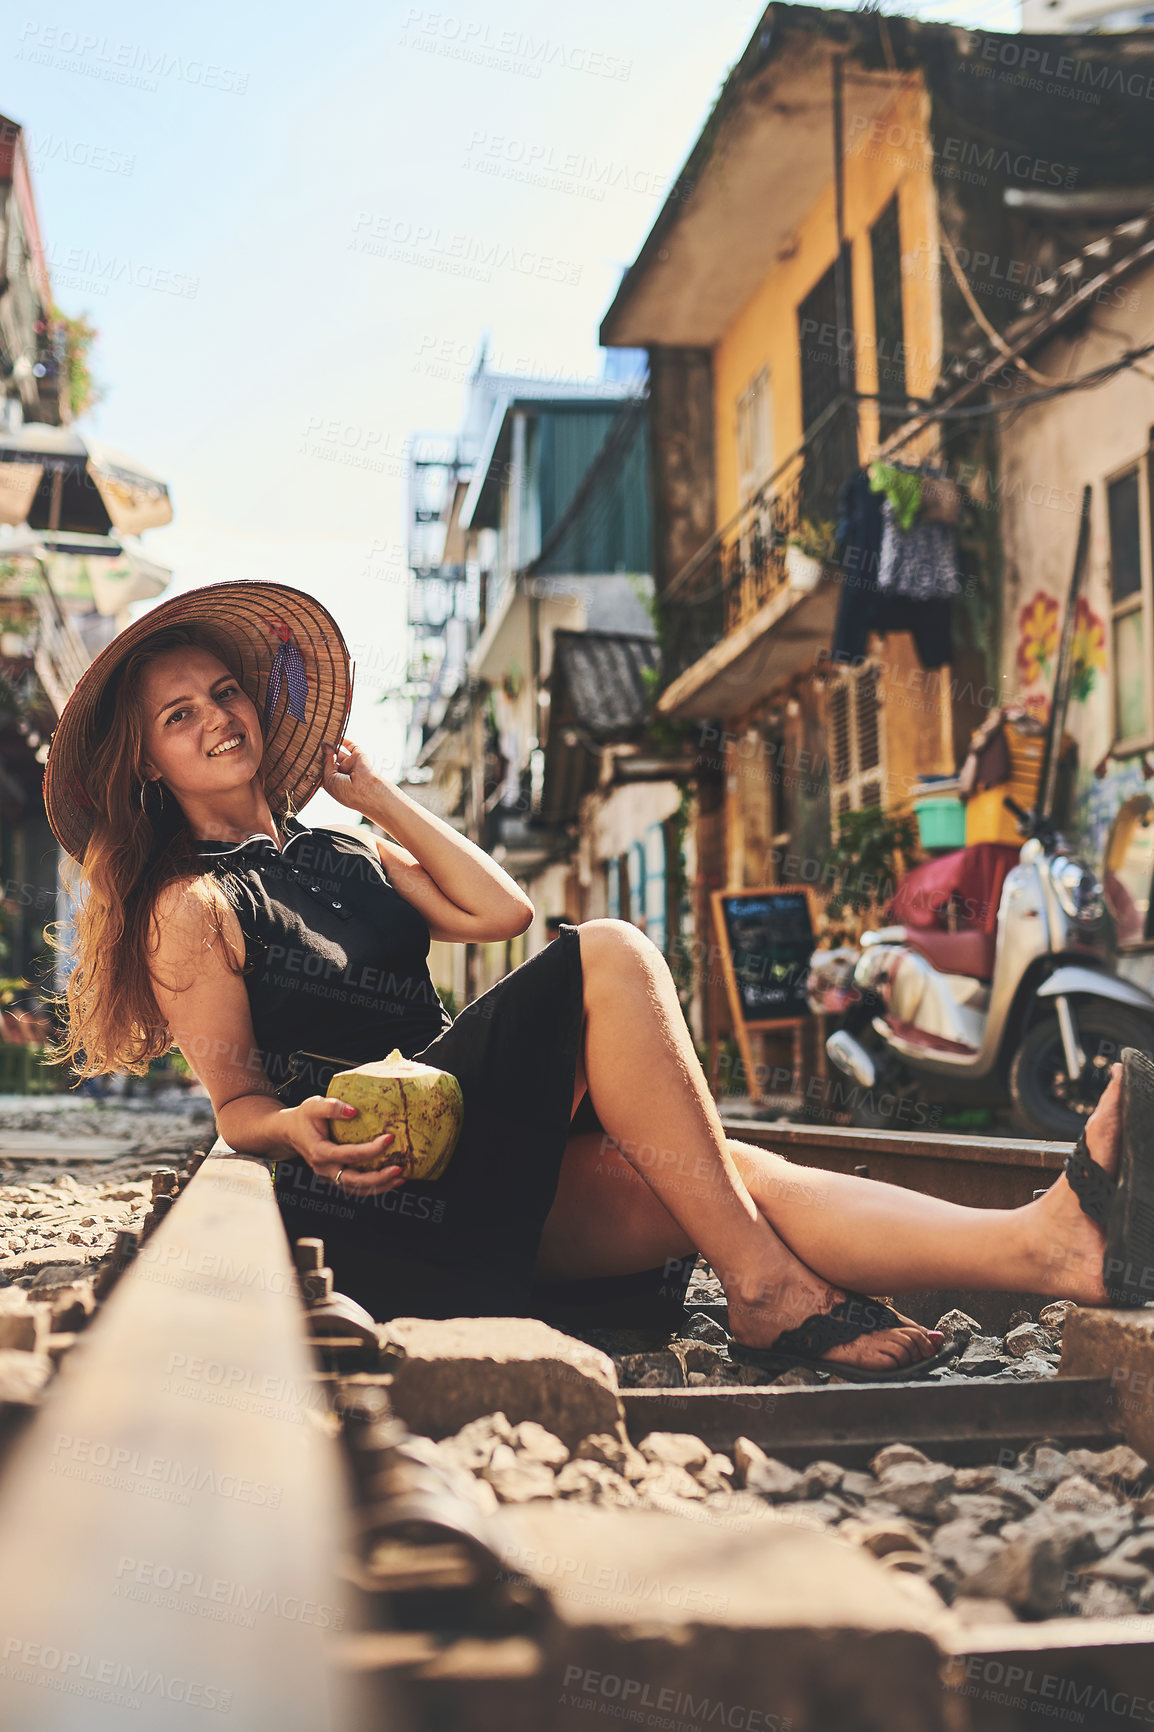 Buy stock photo Shot of a woman having coconut water while relaxing on the train tracks in the streets of Vietnam